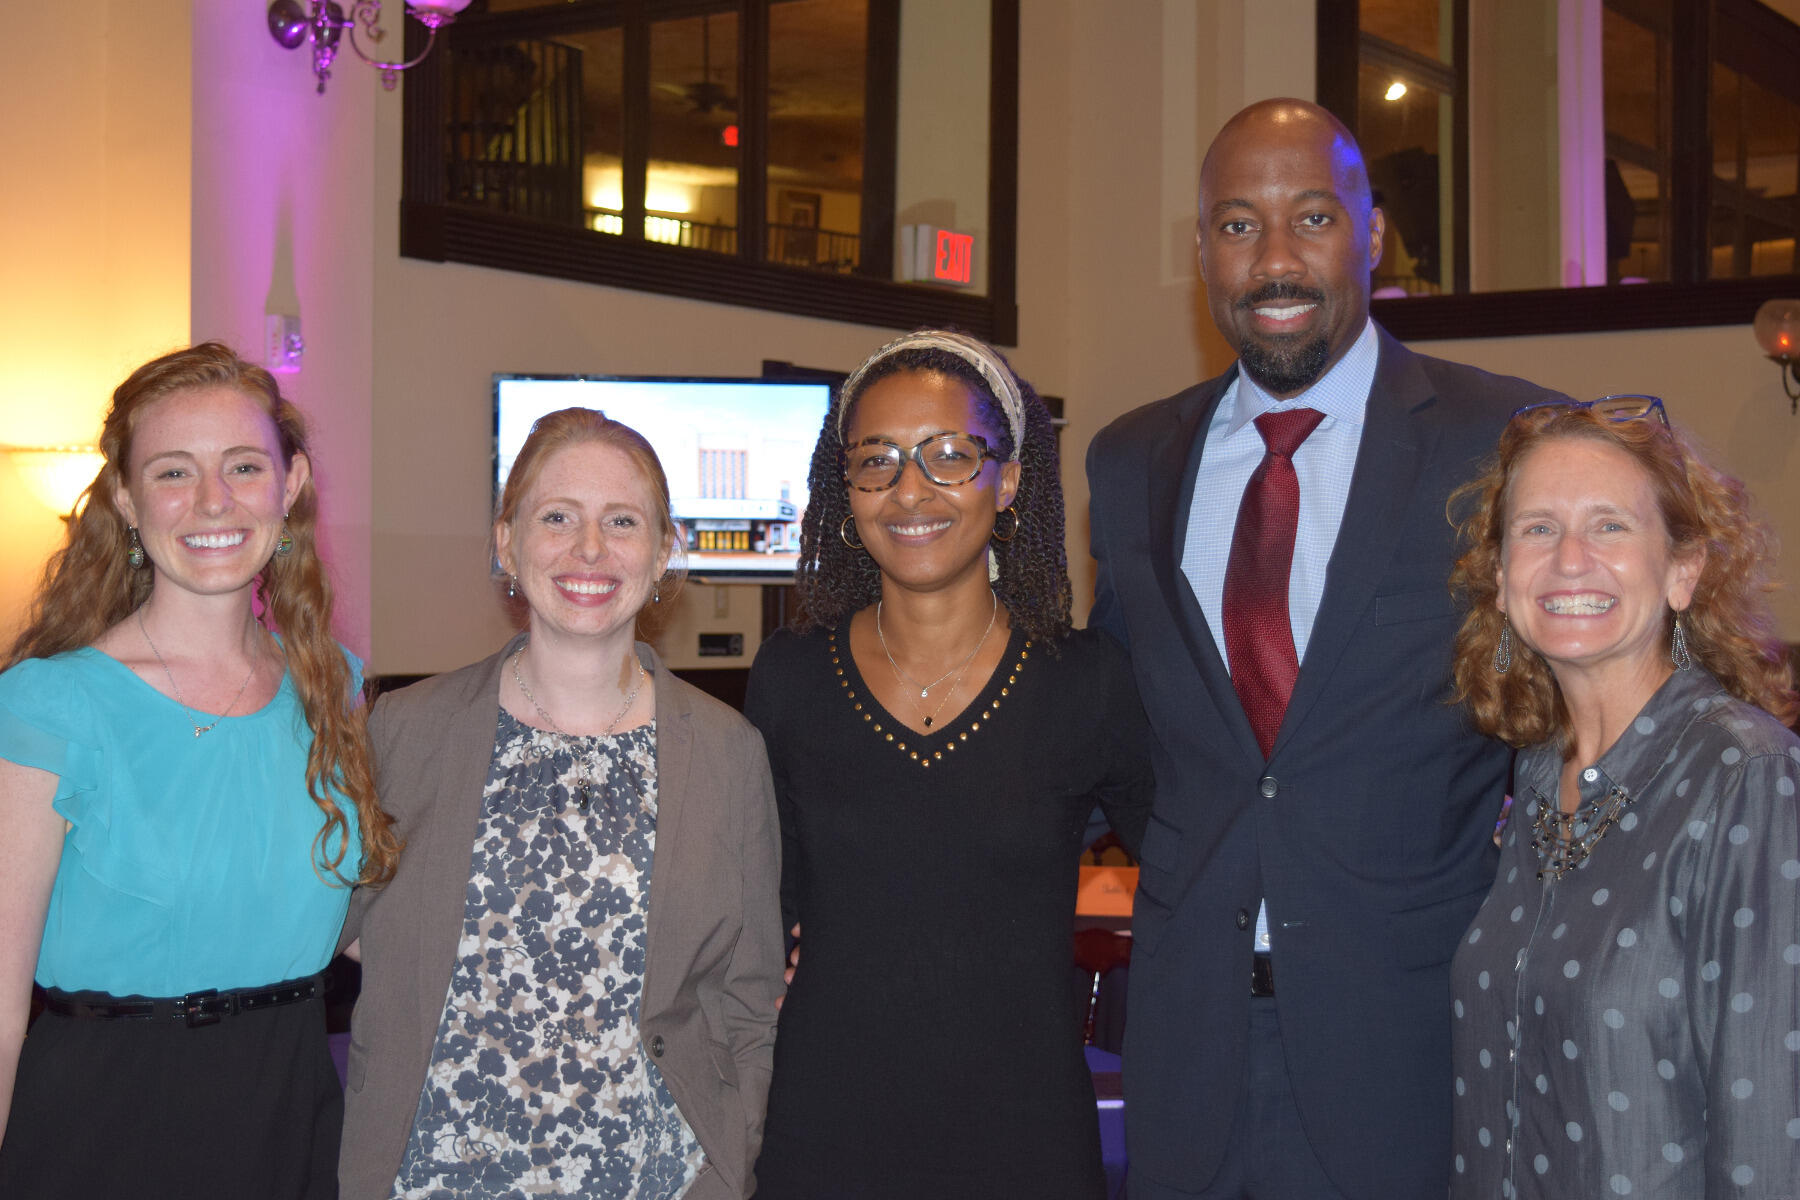 The iCubed team, from left: Jena Gray, Emily Avesian, Brandi Summers, Ph.D.,  Aashir Nasim, Ph.D., and Susan Brock Wilkes, Ph.D.
